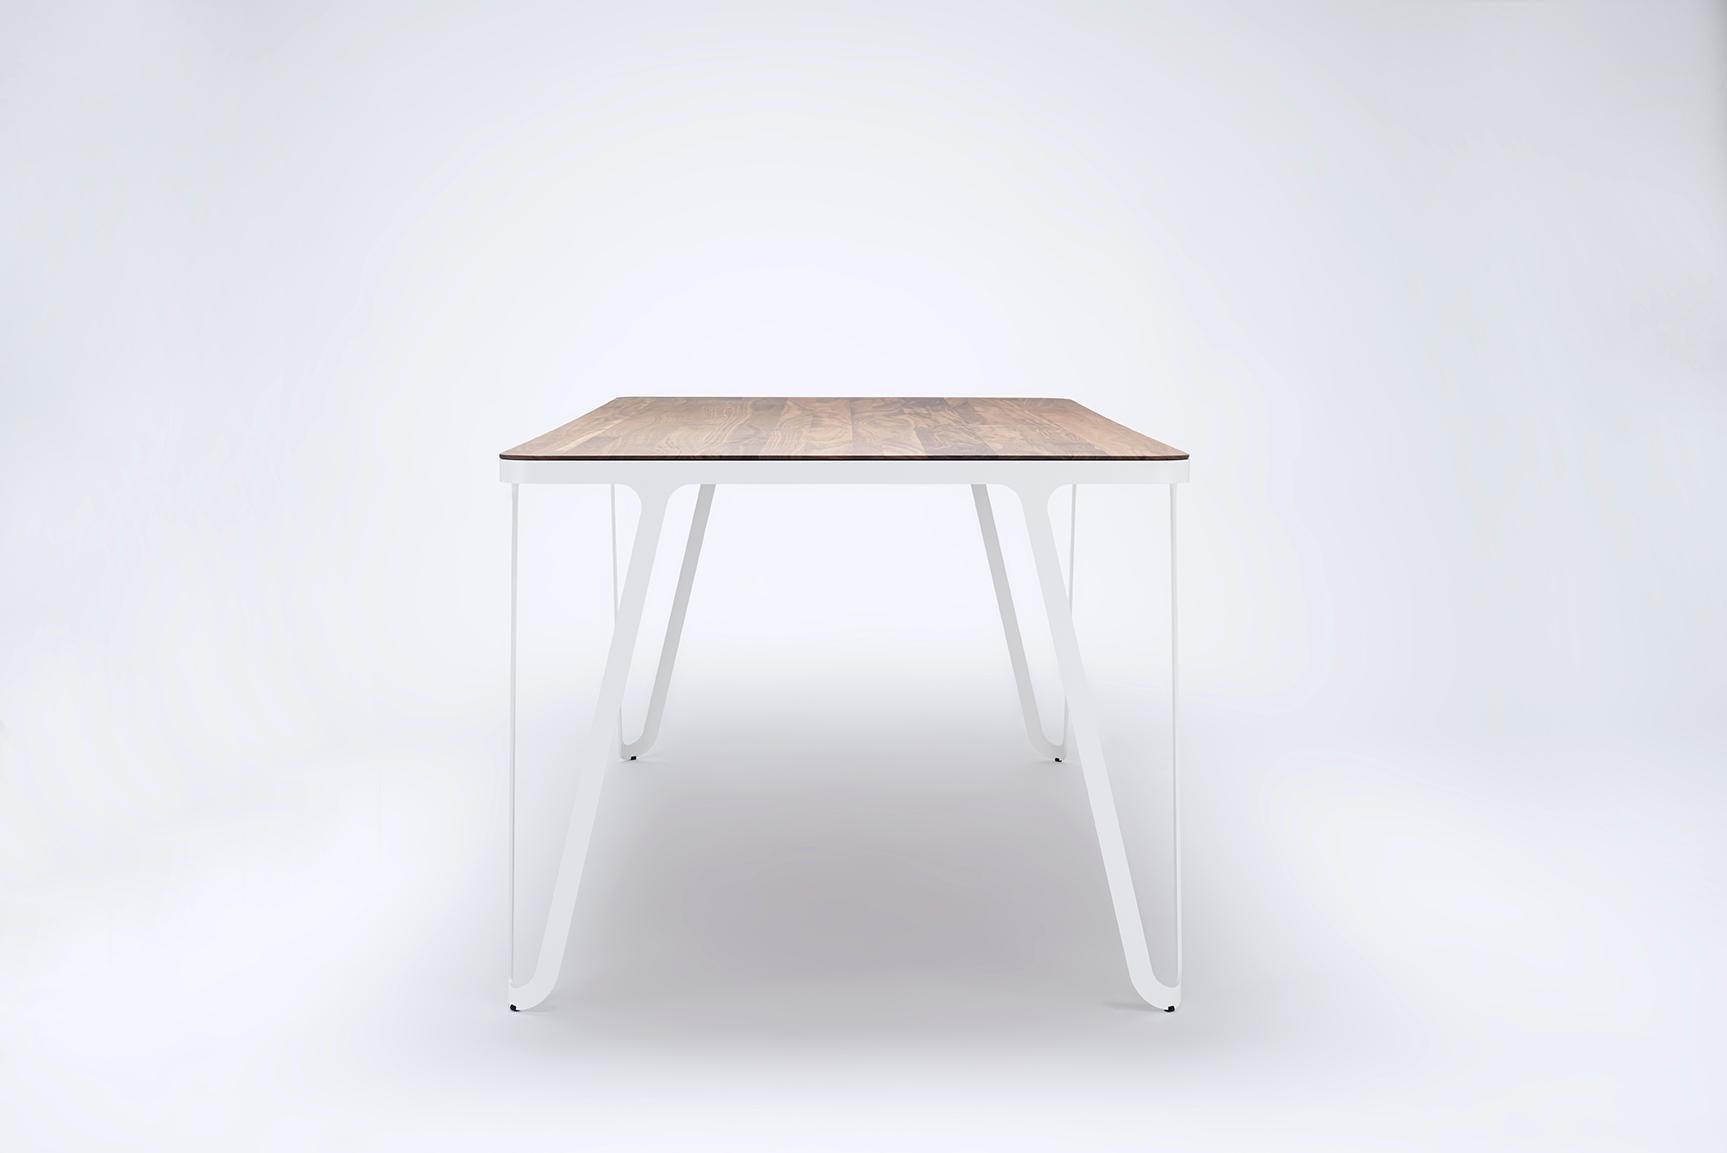 Loop Table 90 Ash by Sebastian Scherer.
Dimensions: D90 x W90 x H74 cm.
Materials: Ash, Aluminium, Wood.
Weight: 23.9 kg.
Also Available: Colours:Solid wood (matt lacquered or oiled): black and white stained ash / natural oak / american